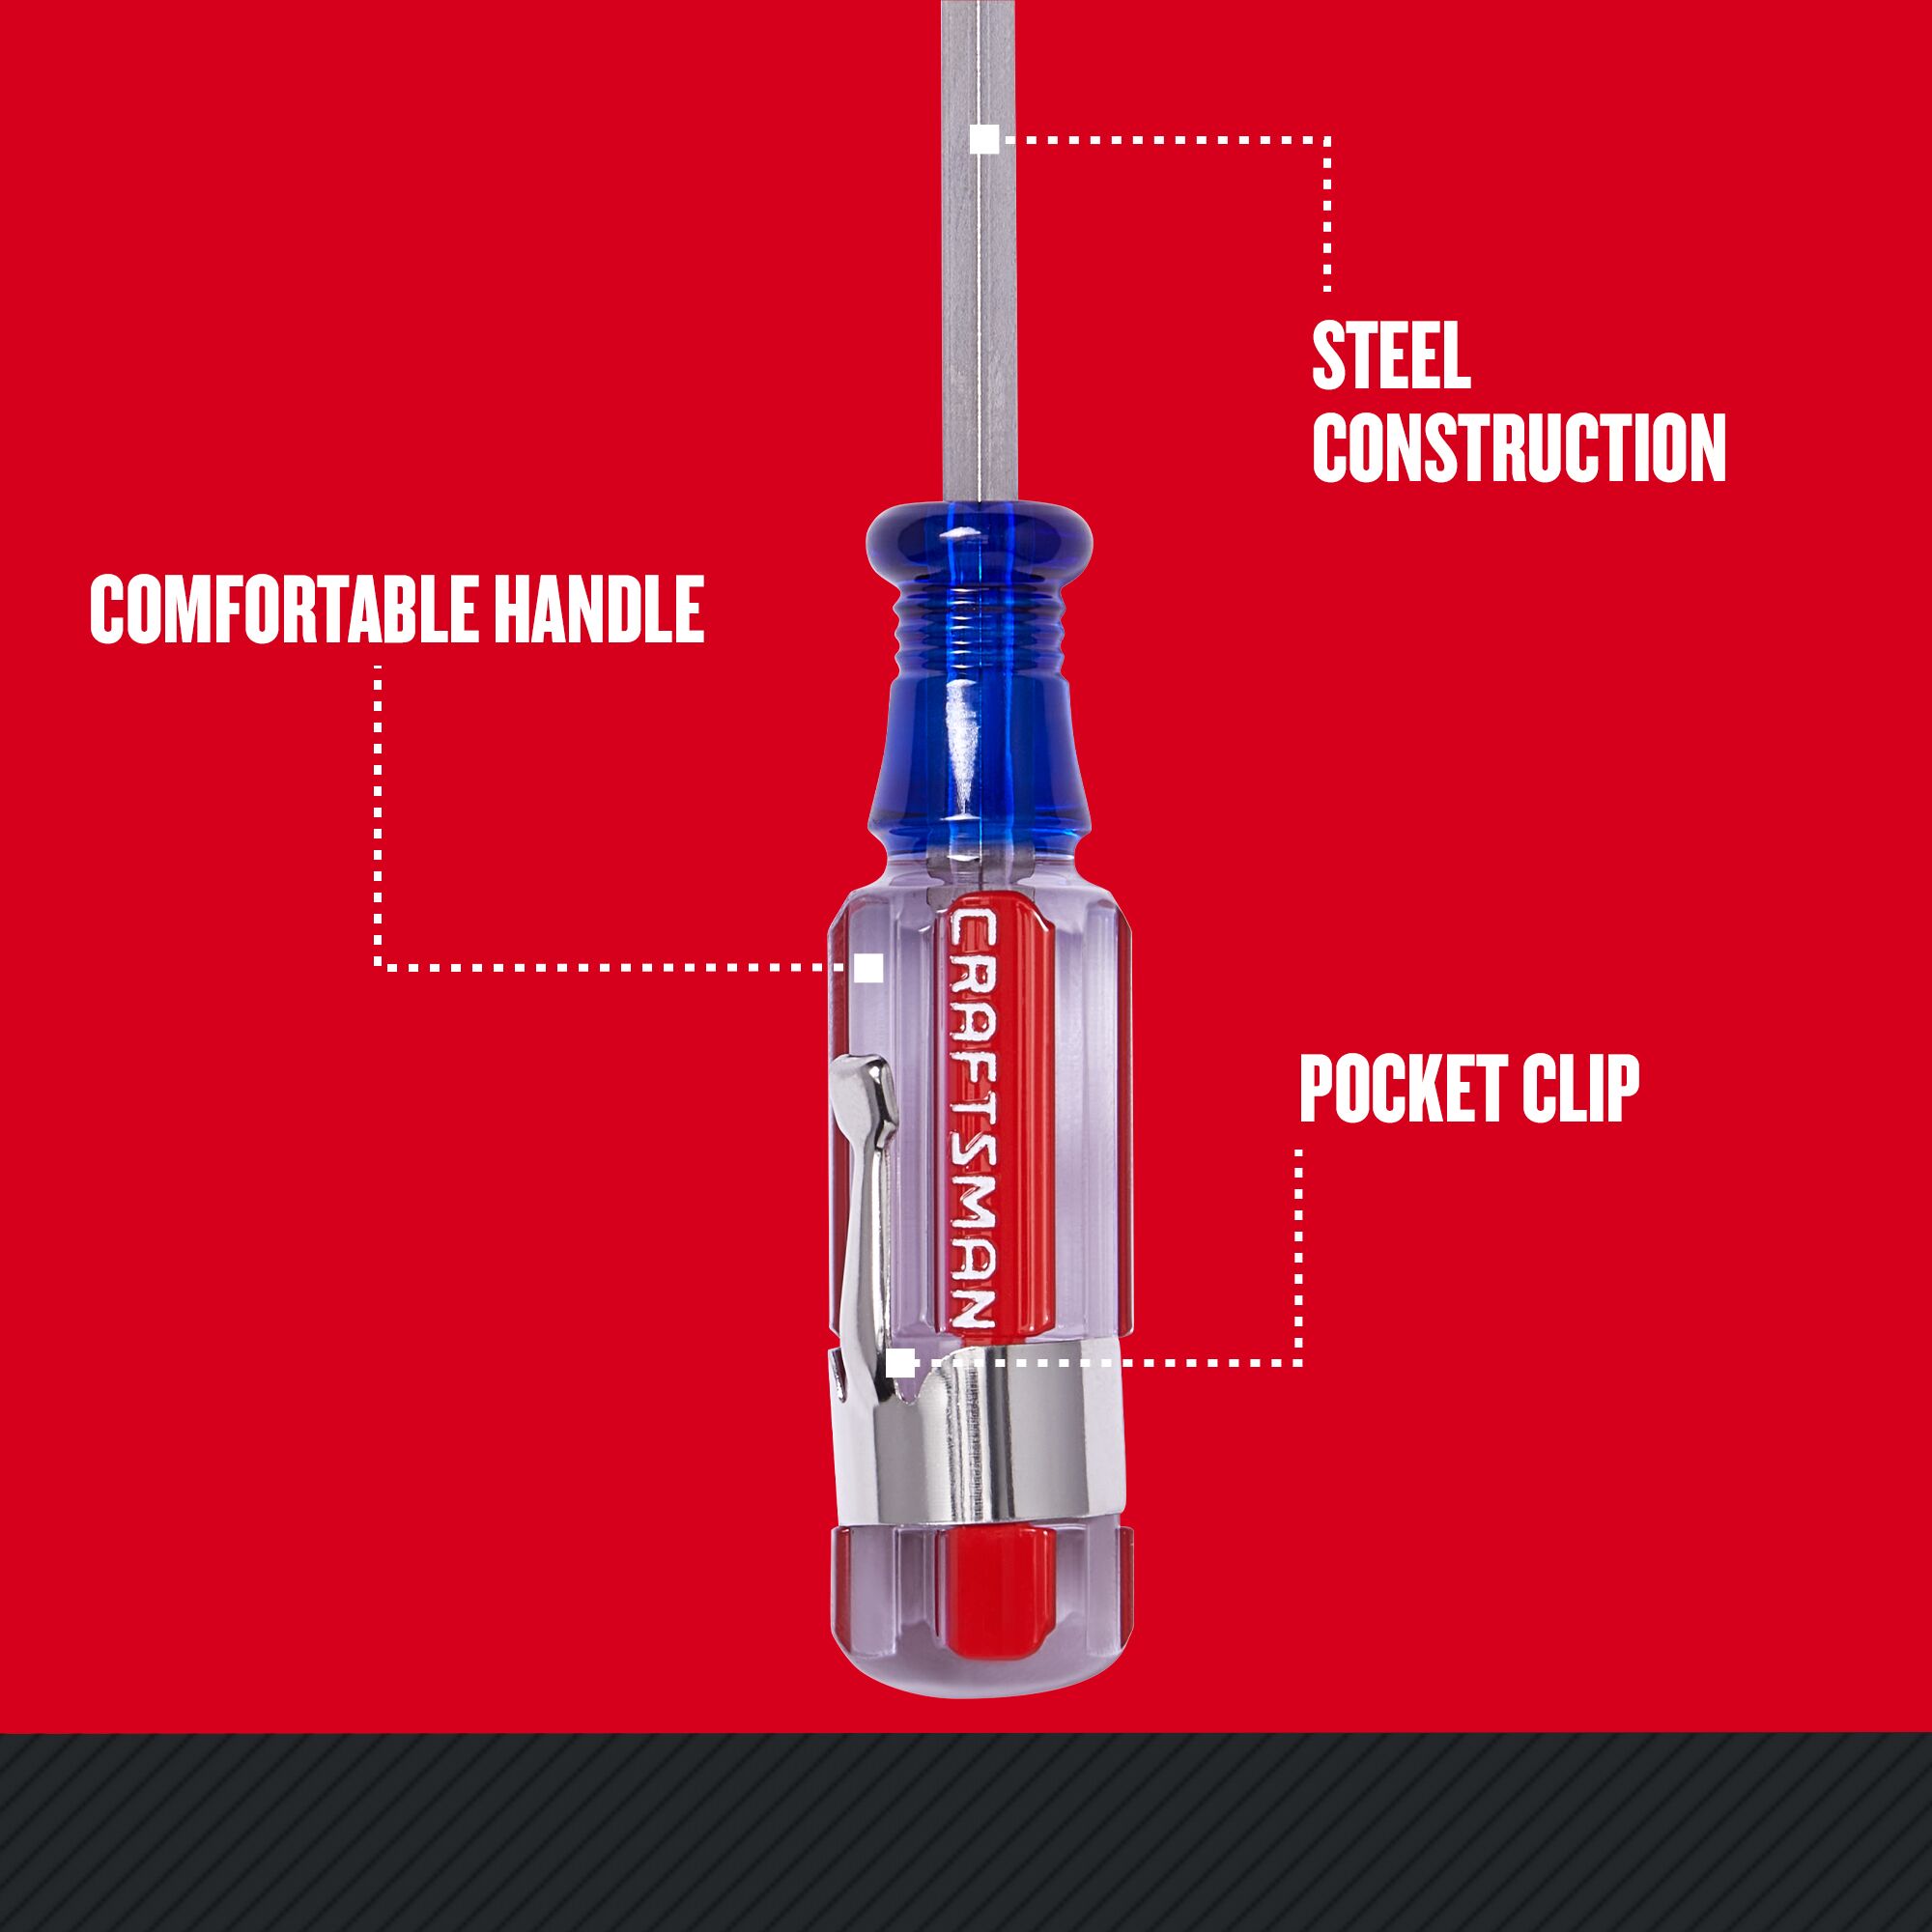 Graphic of CRAFTSMAN Screwdrivers: Acetate highlighting product features